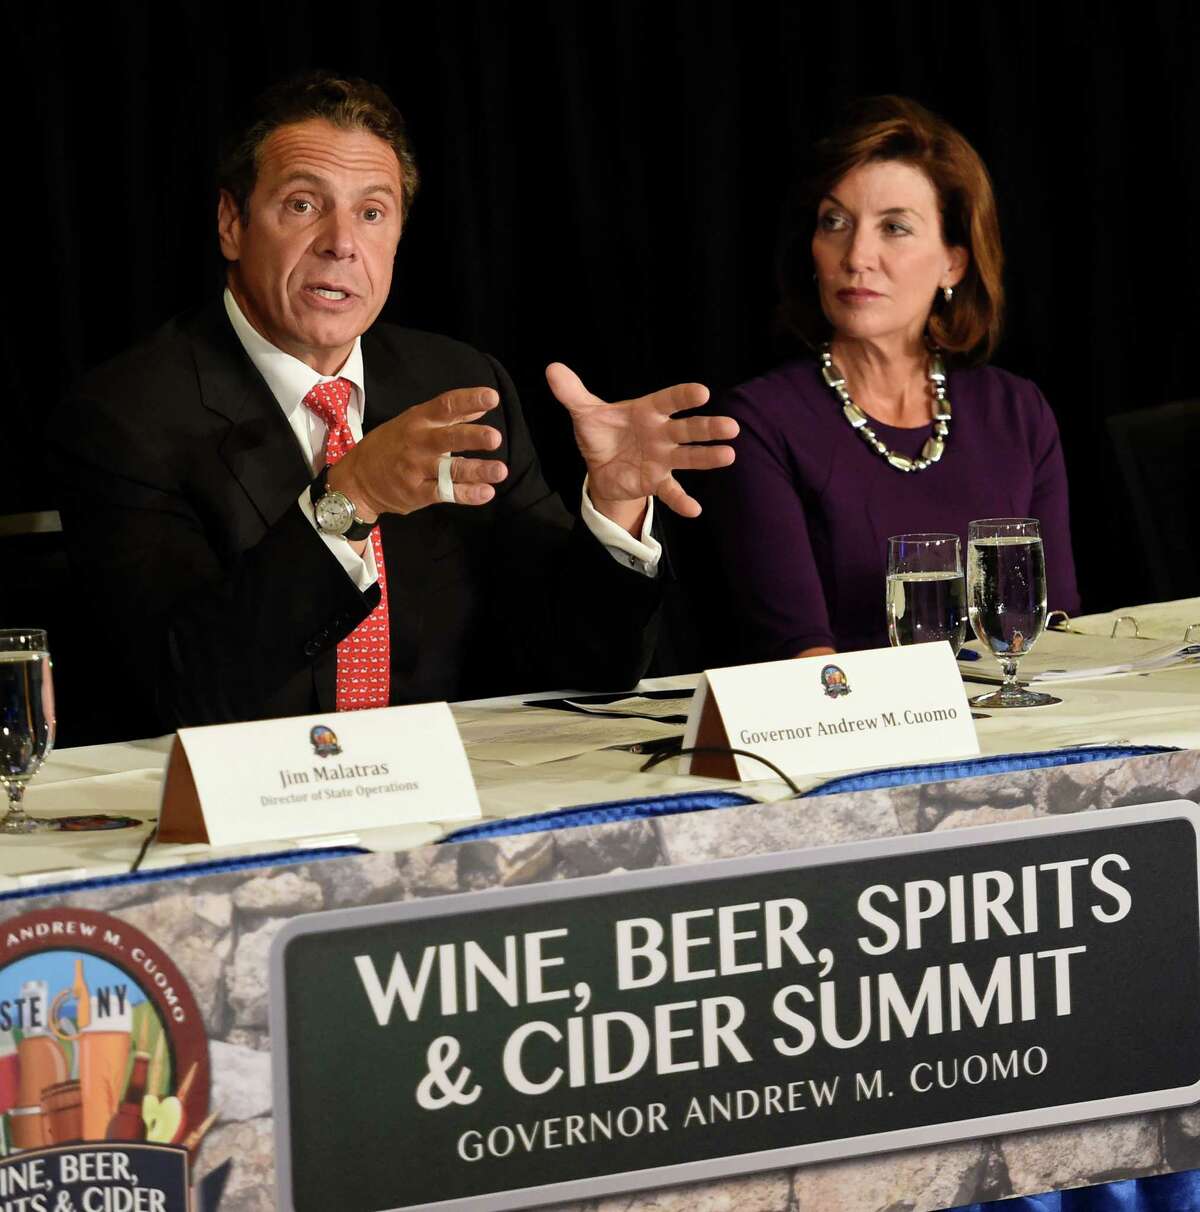 Governor Andrew Cuomo, left, chairs the Beer, Wine, Spirits and Cider Summit held in the Hart Lounge at the Empire State Plaza Oct. 7, 2015 in Albany, N.Y. Joining the Governor is Lt. Governor Kathy Hochul. (Skip Dickstein/Times Union)